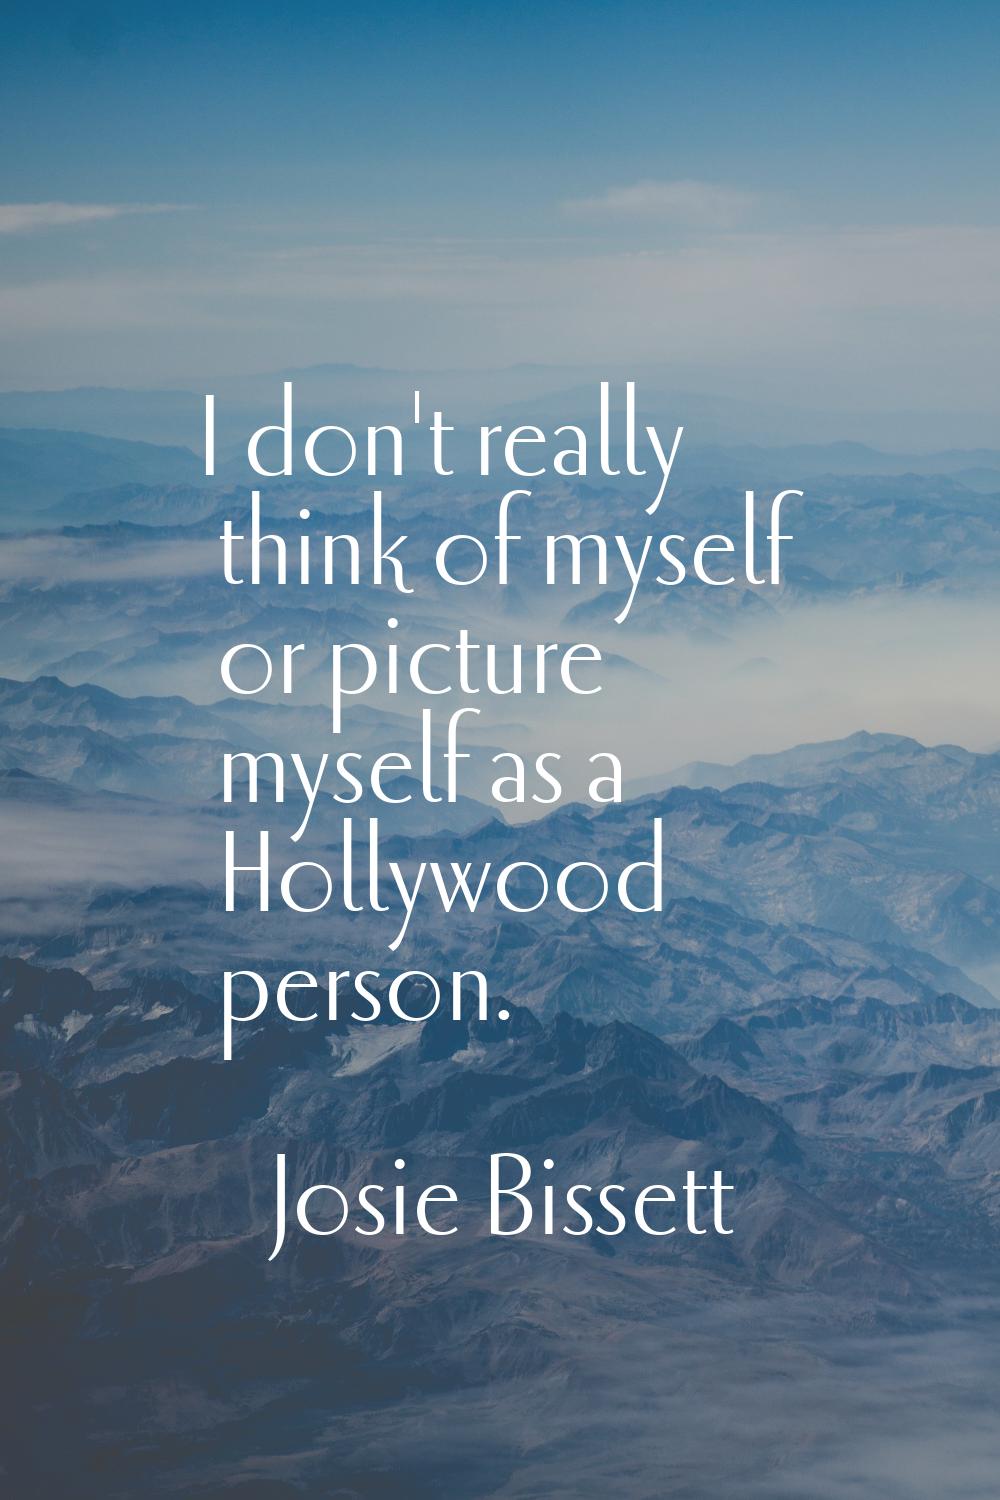 I don't really think of myself or picture myself as a Hollywood person.